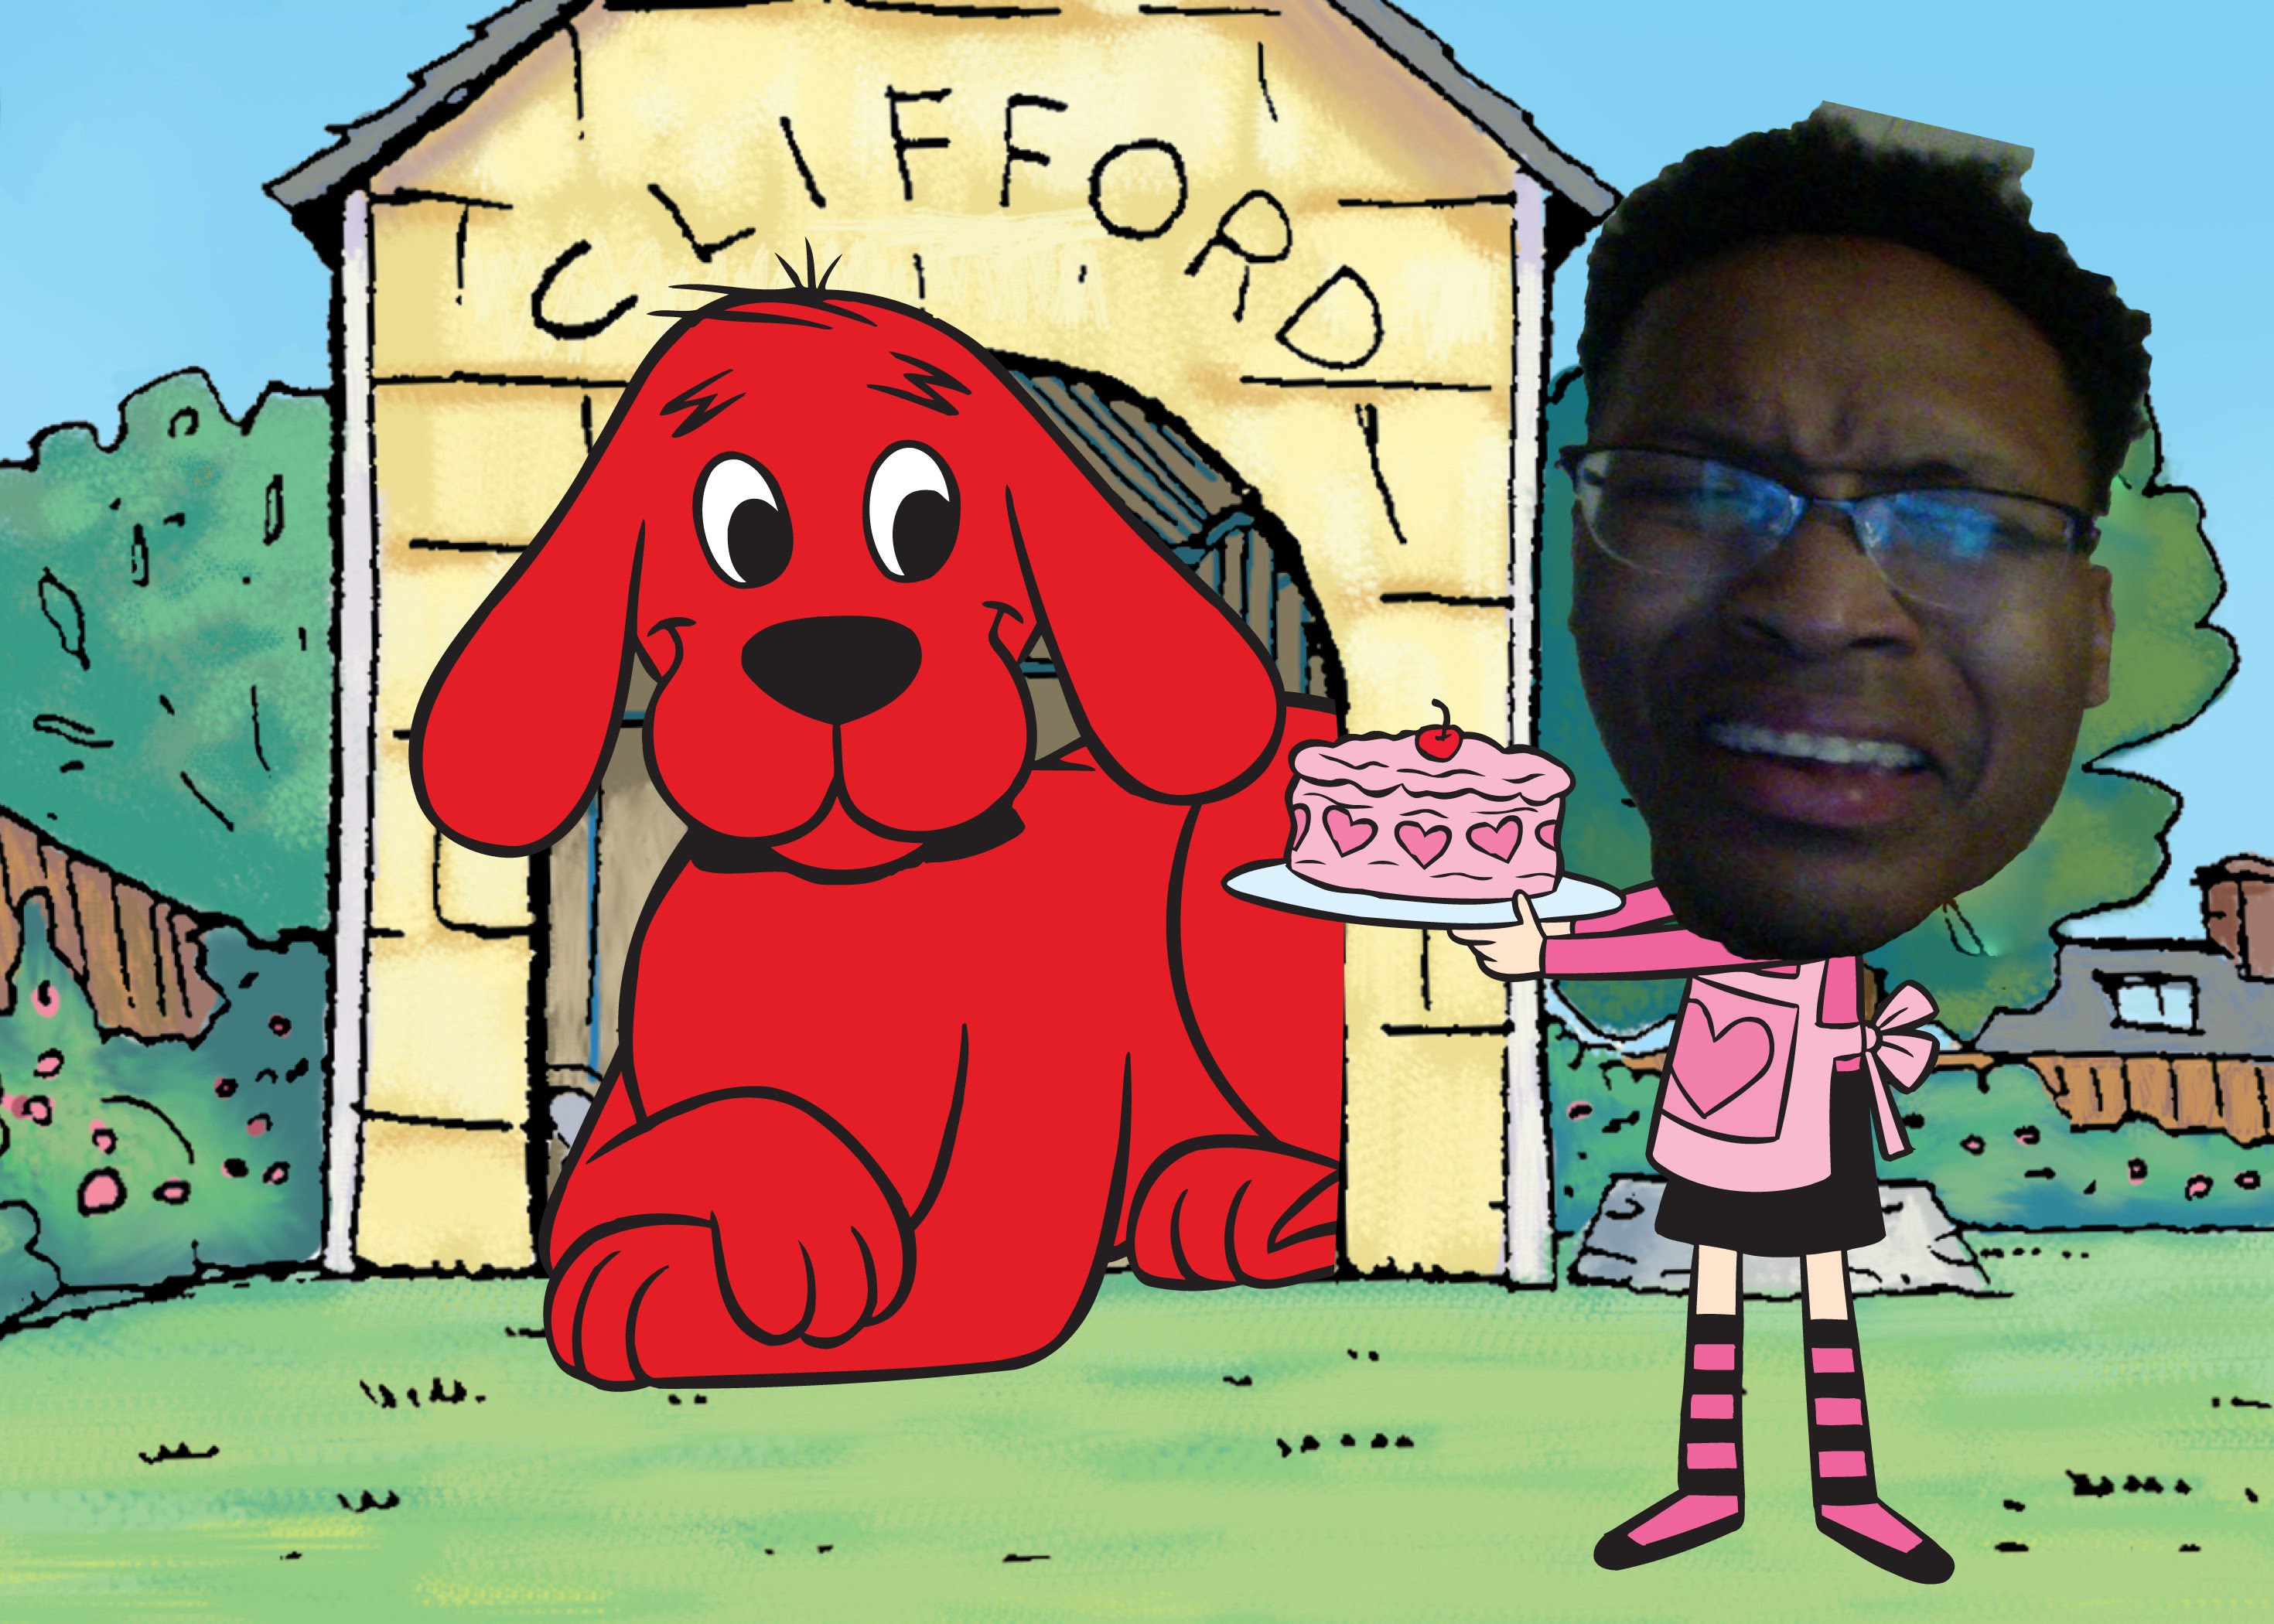 Clifford Backgrounds on Wallpapers Vista